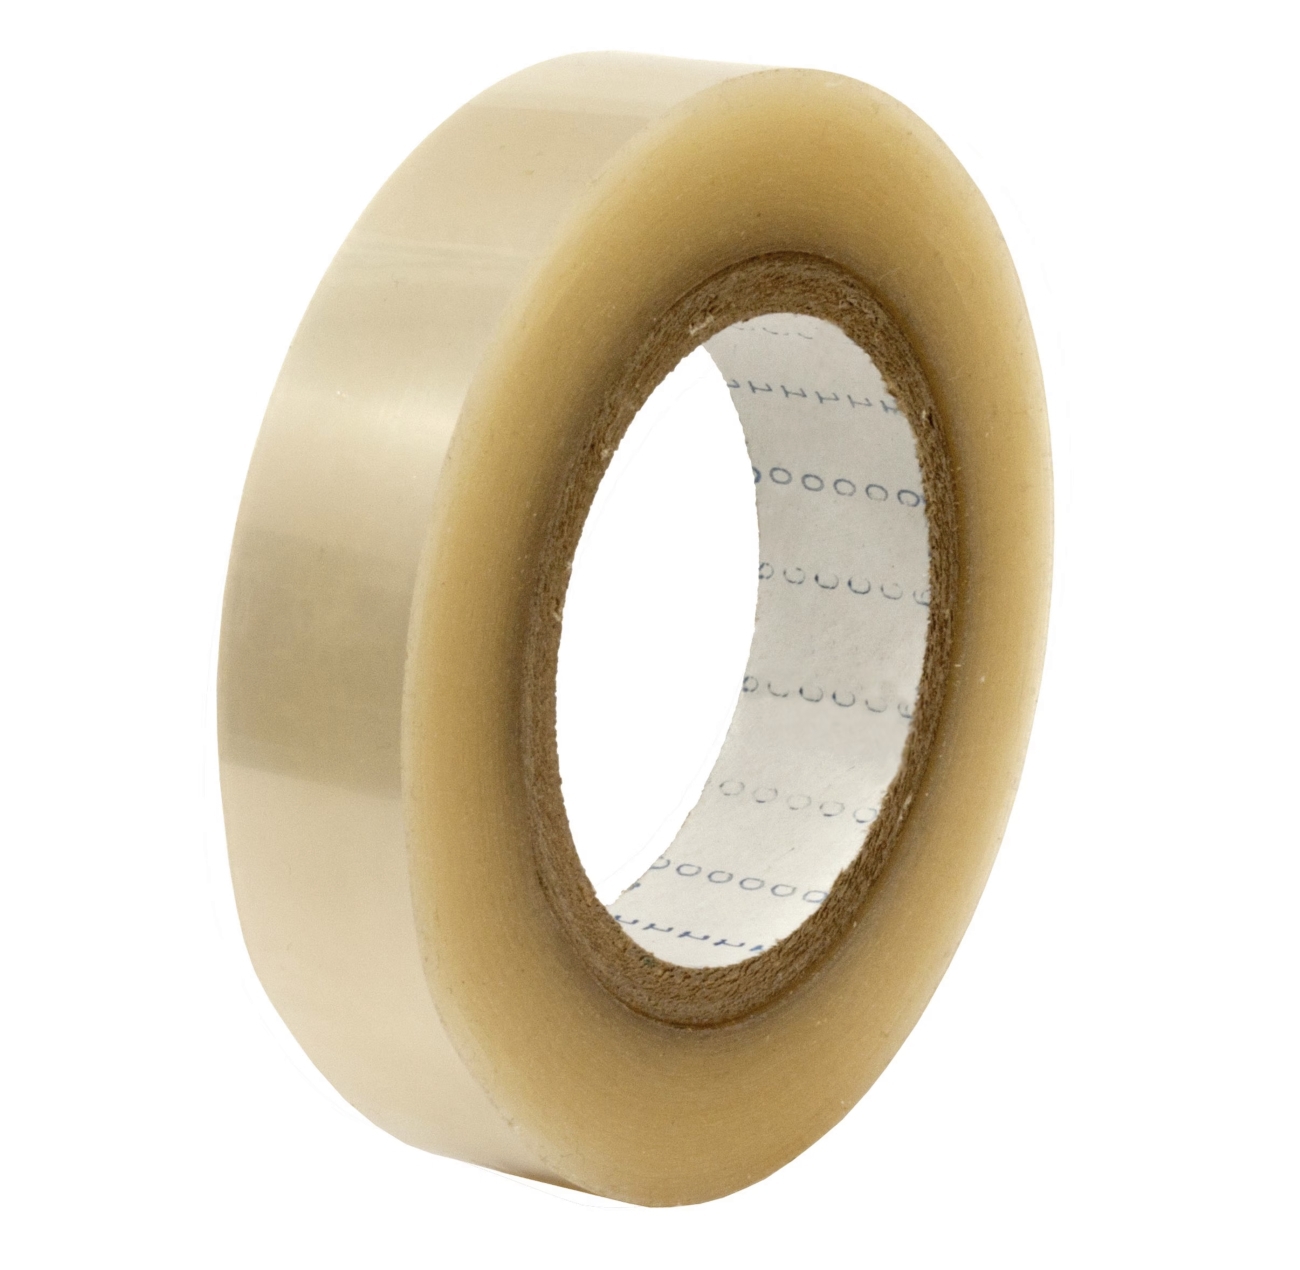 S-K-S double-sided adhesive tape with polyester backing 960, transparent, 6 mm x 66 m, silicone adhesive, 0.085 mm